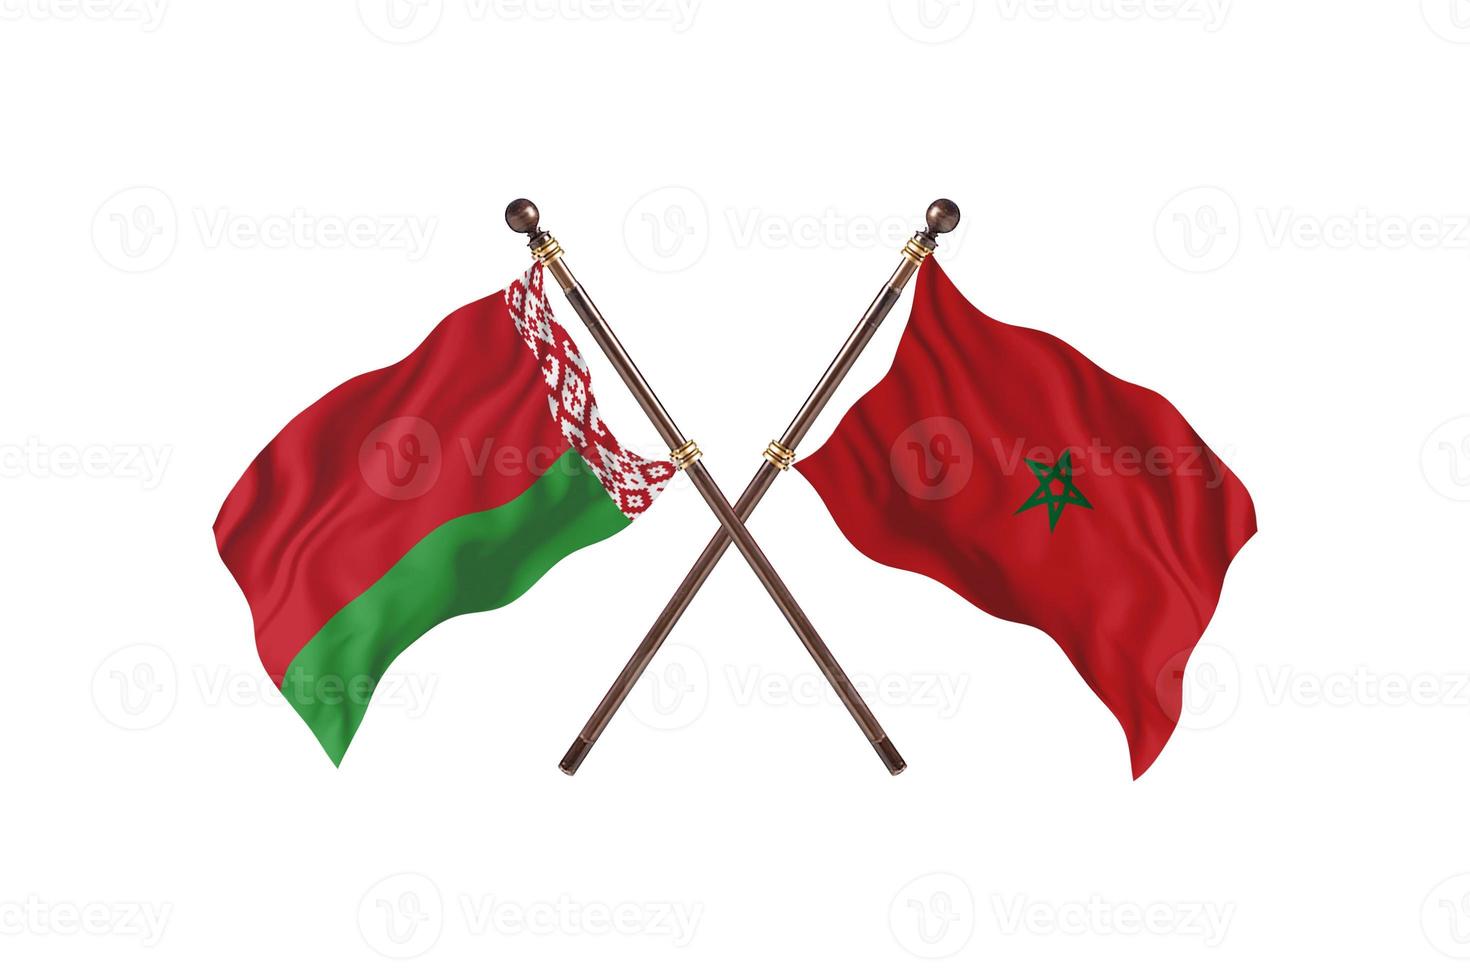 Belarus versus Morocco Two Country Flags photo